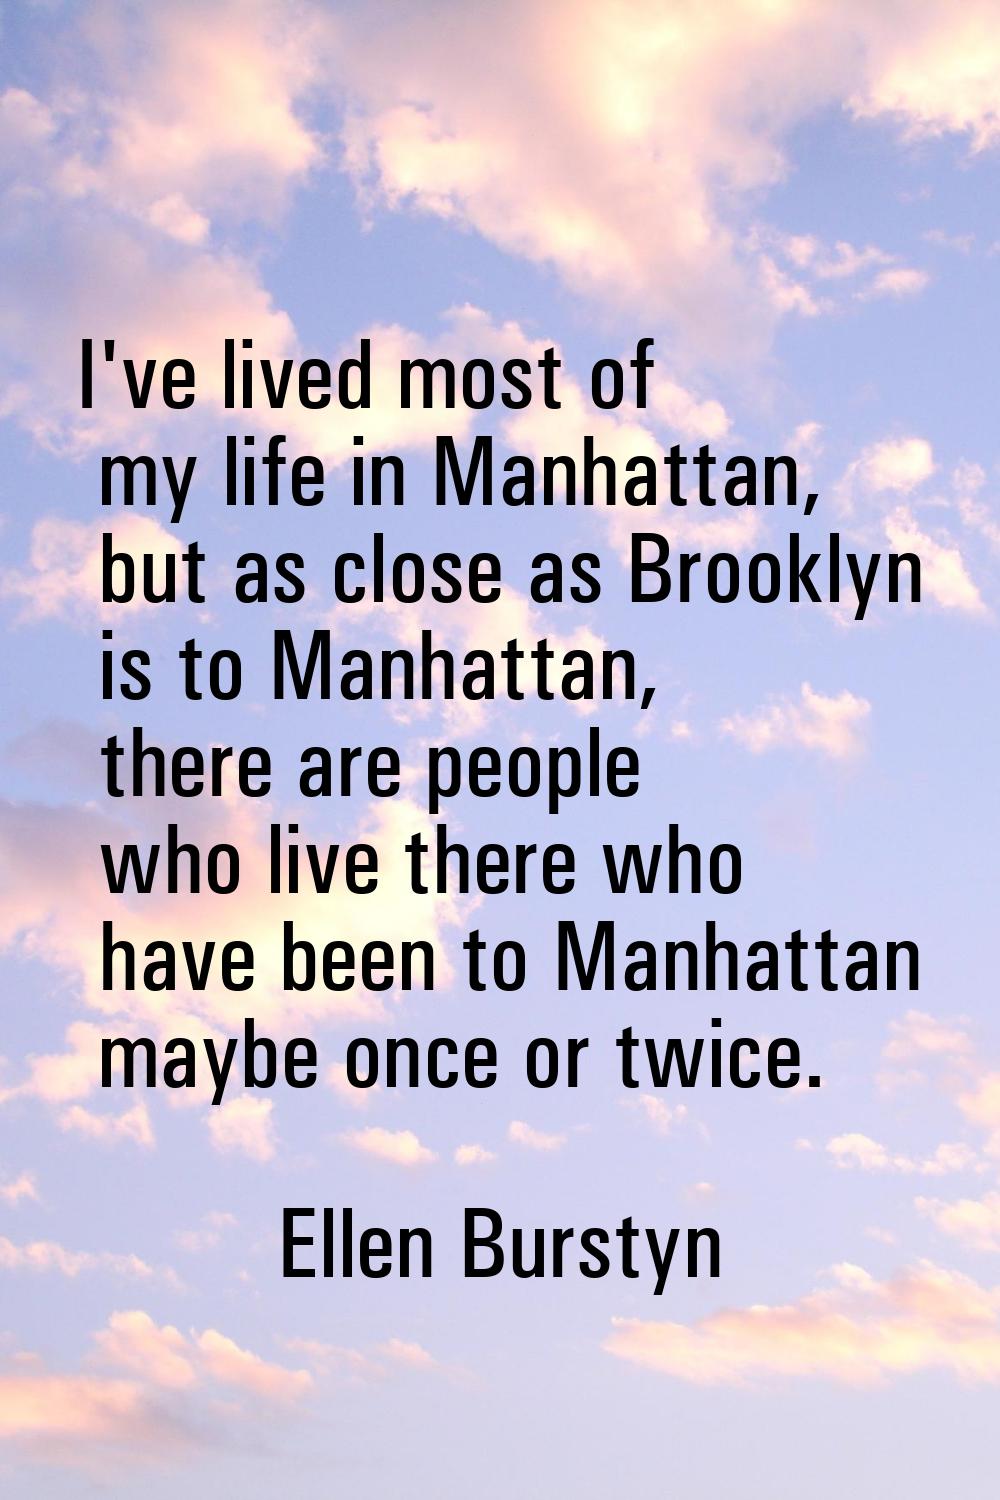 I've lived most of my life in Manhattan, but as close as Brooklyn is to Manhattan, there are people